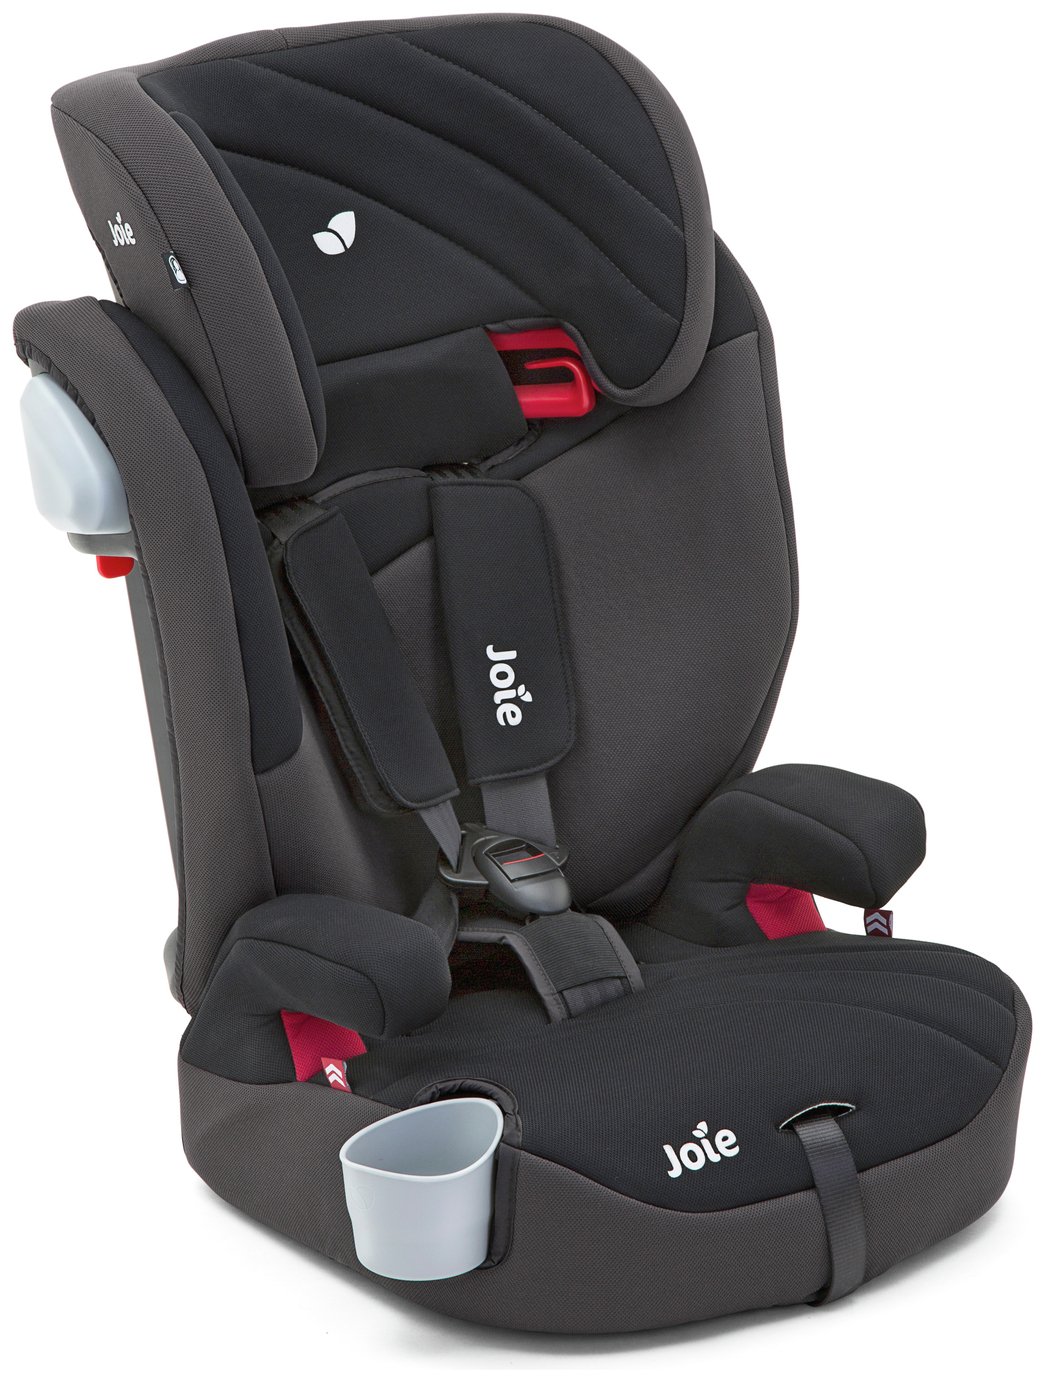 Joie Elevate 2.0 Group 1-2-3 Two Tone Black Car Seat. Review